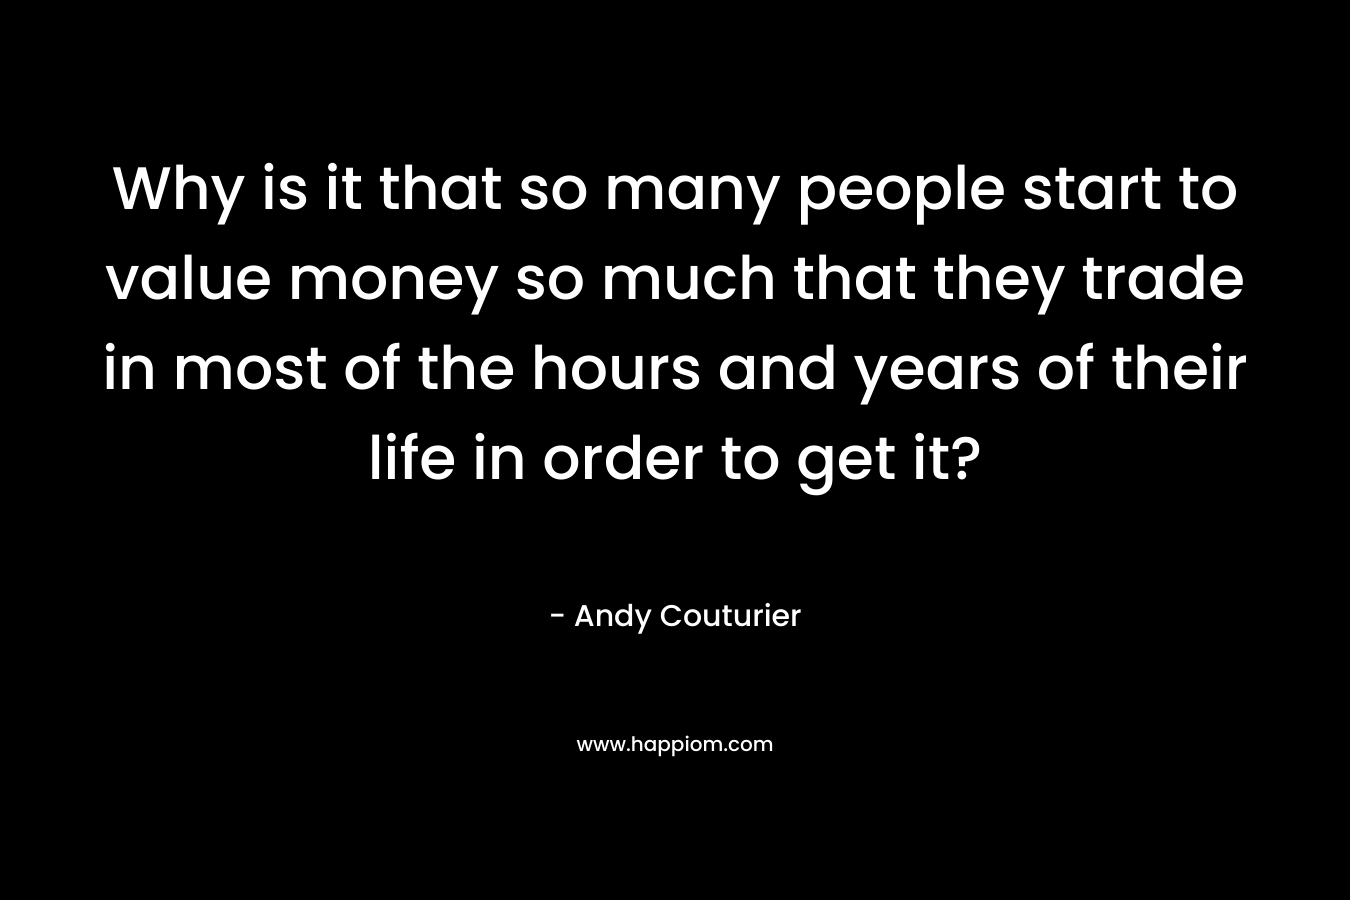 Why is it that so many people start to value money so much that they trade in most of the hours and years of their life in order to get it? – Andy Couturier